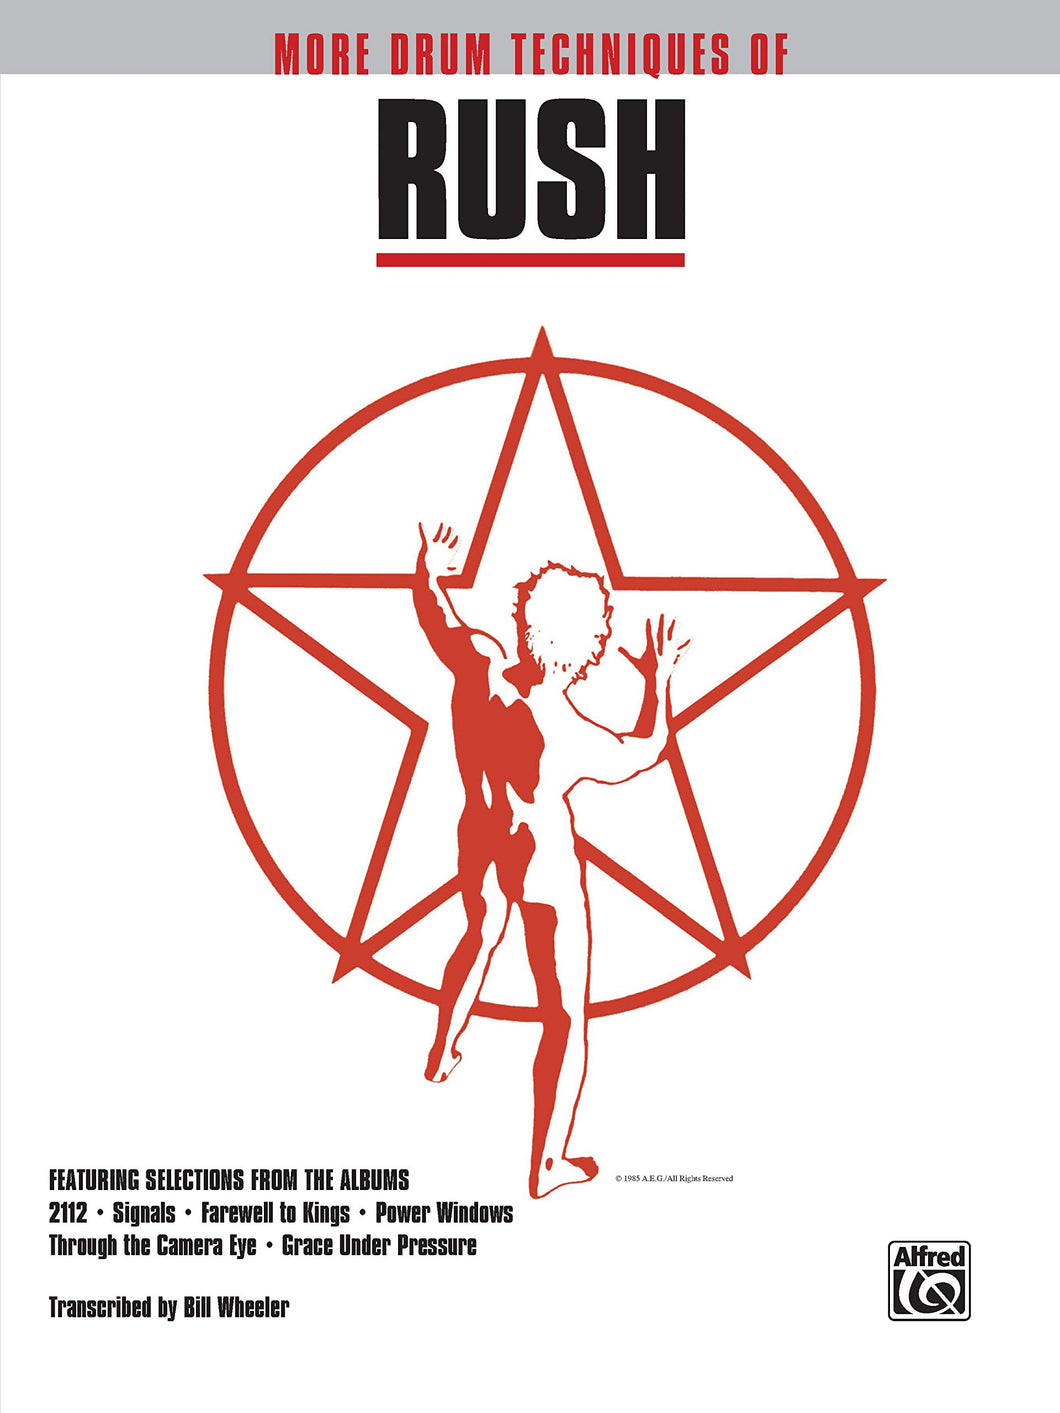 2112 (Complete Suite) - Rush - Collection of Drum Transcriptions / Drum Sheet Music - Alfred Music MDTRDT